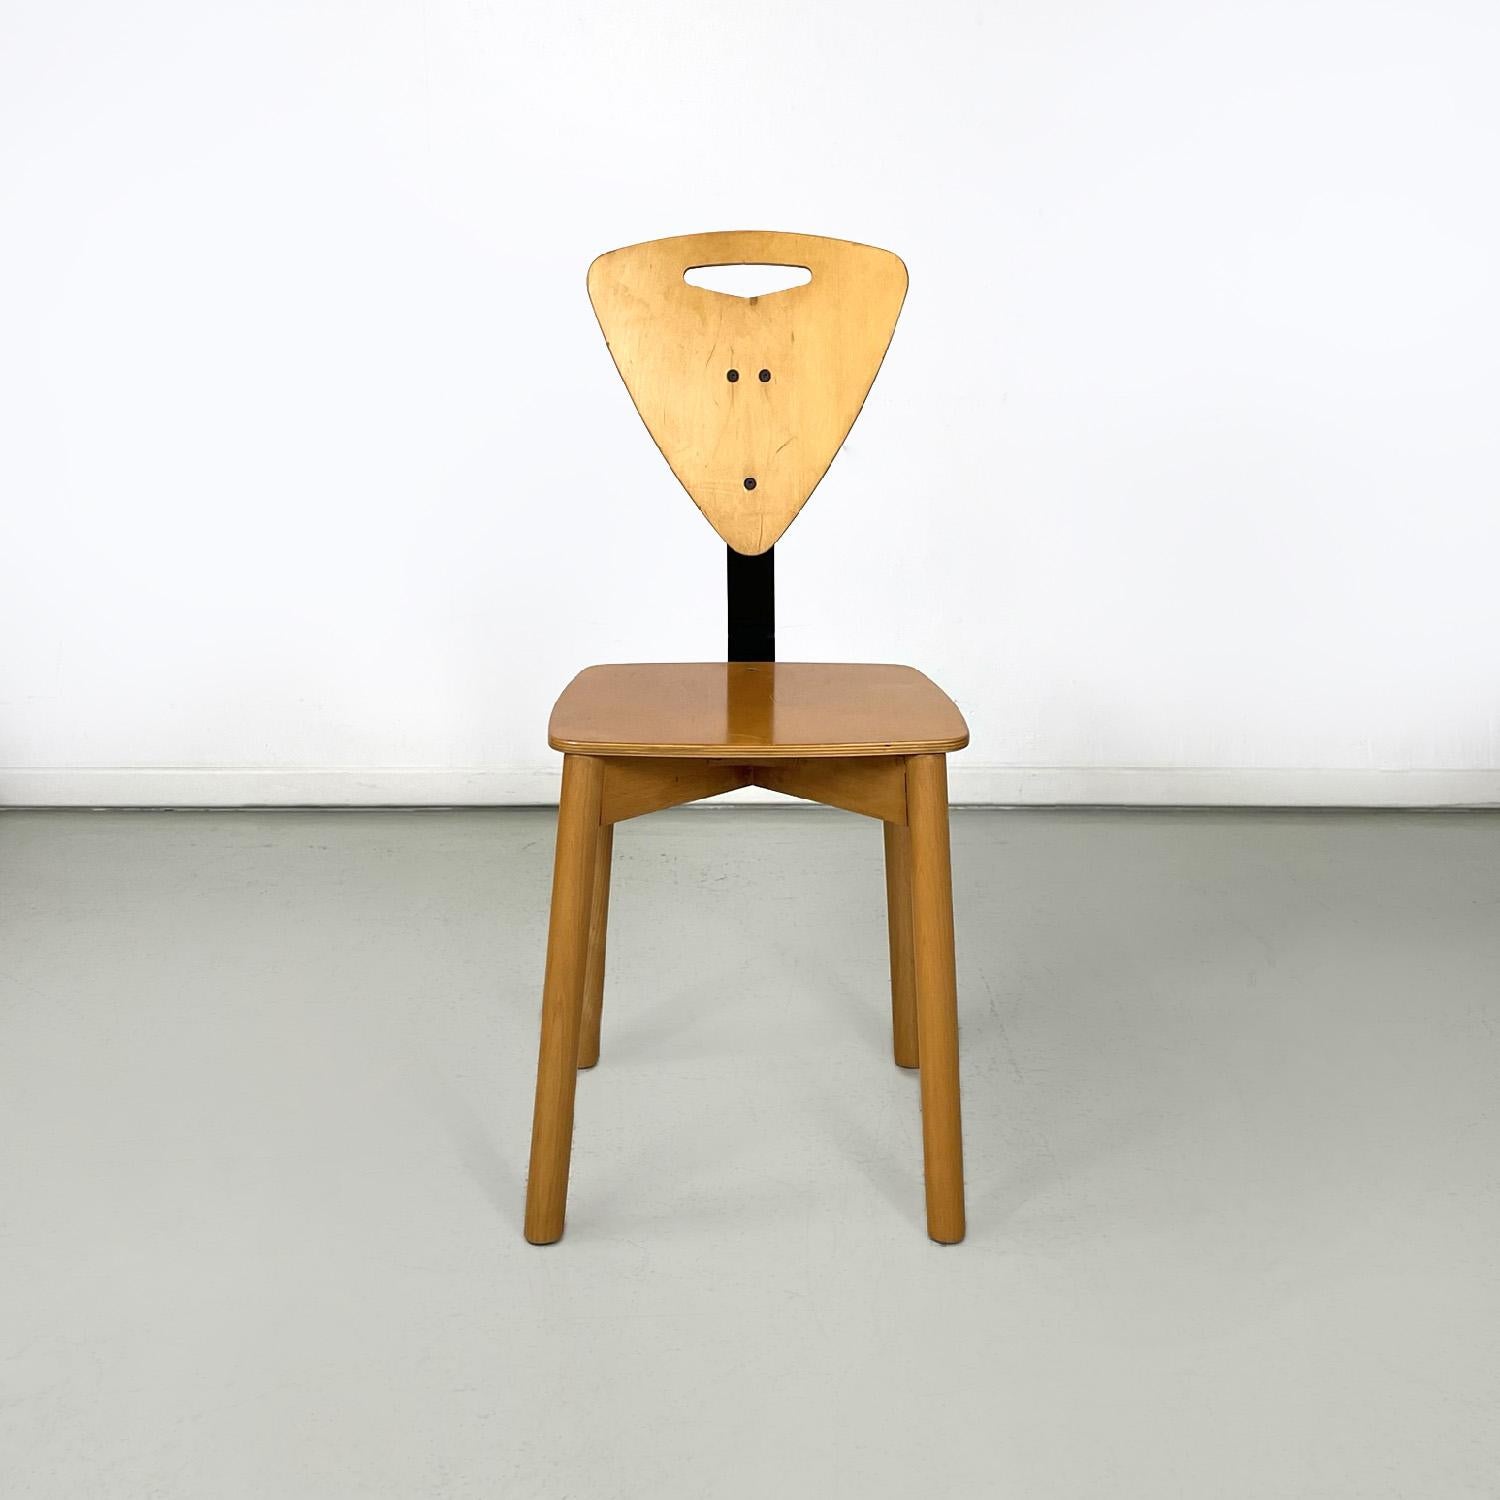 Italian modern light wooden chairs with black metal bars, 1980s
Set of six wooden chairs. The seat is square in shape and has rounded corners; the triangular backrest with an elongated hole is connected to the seat thanks to a black metal band. The